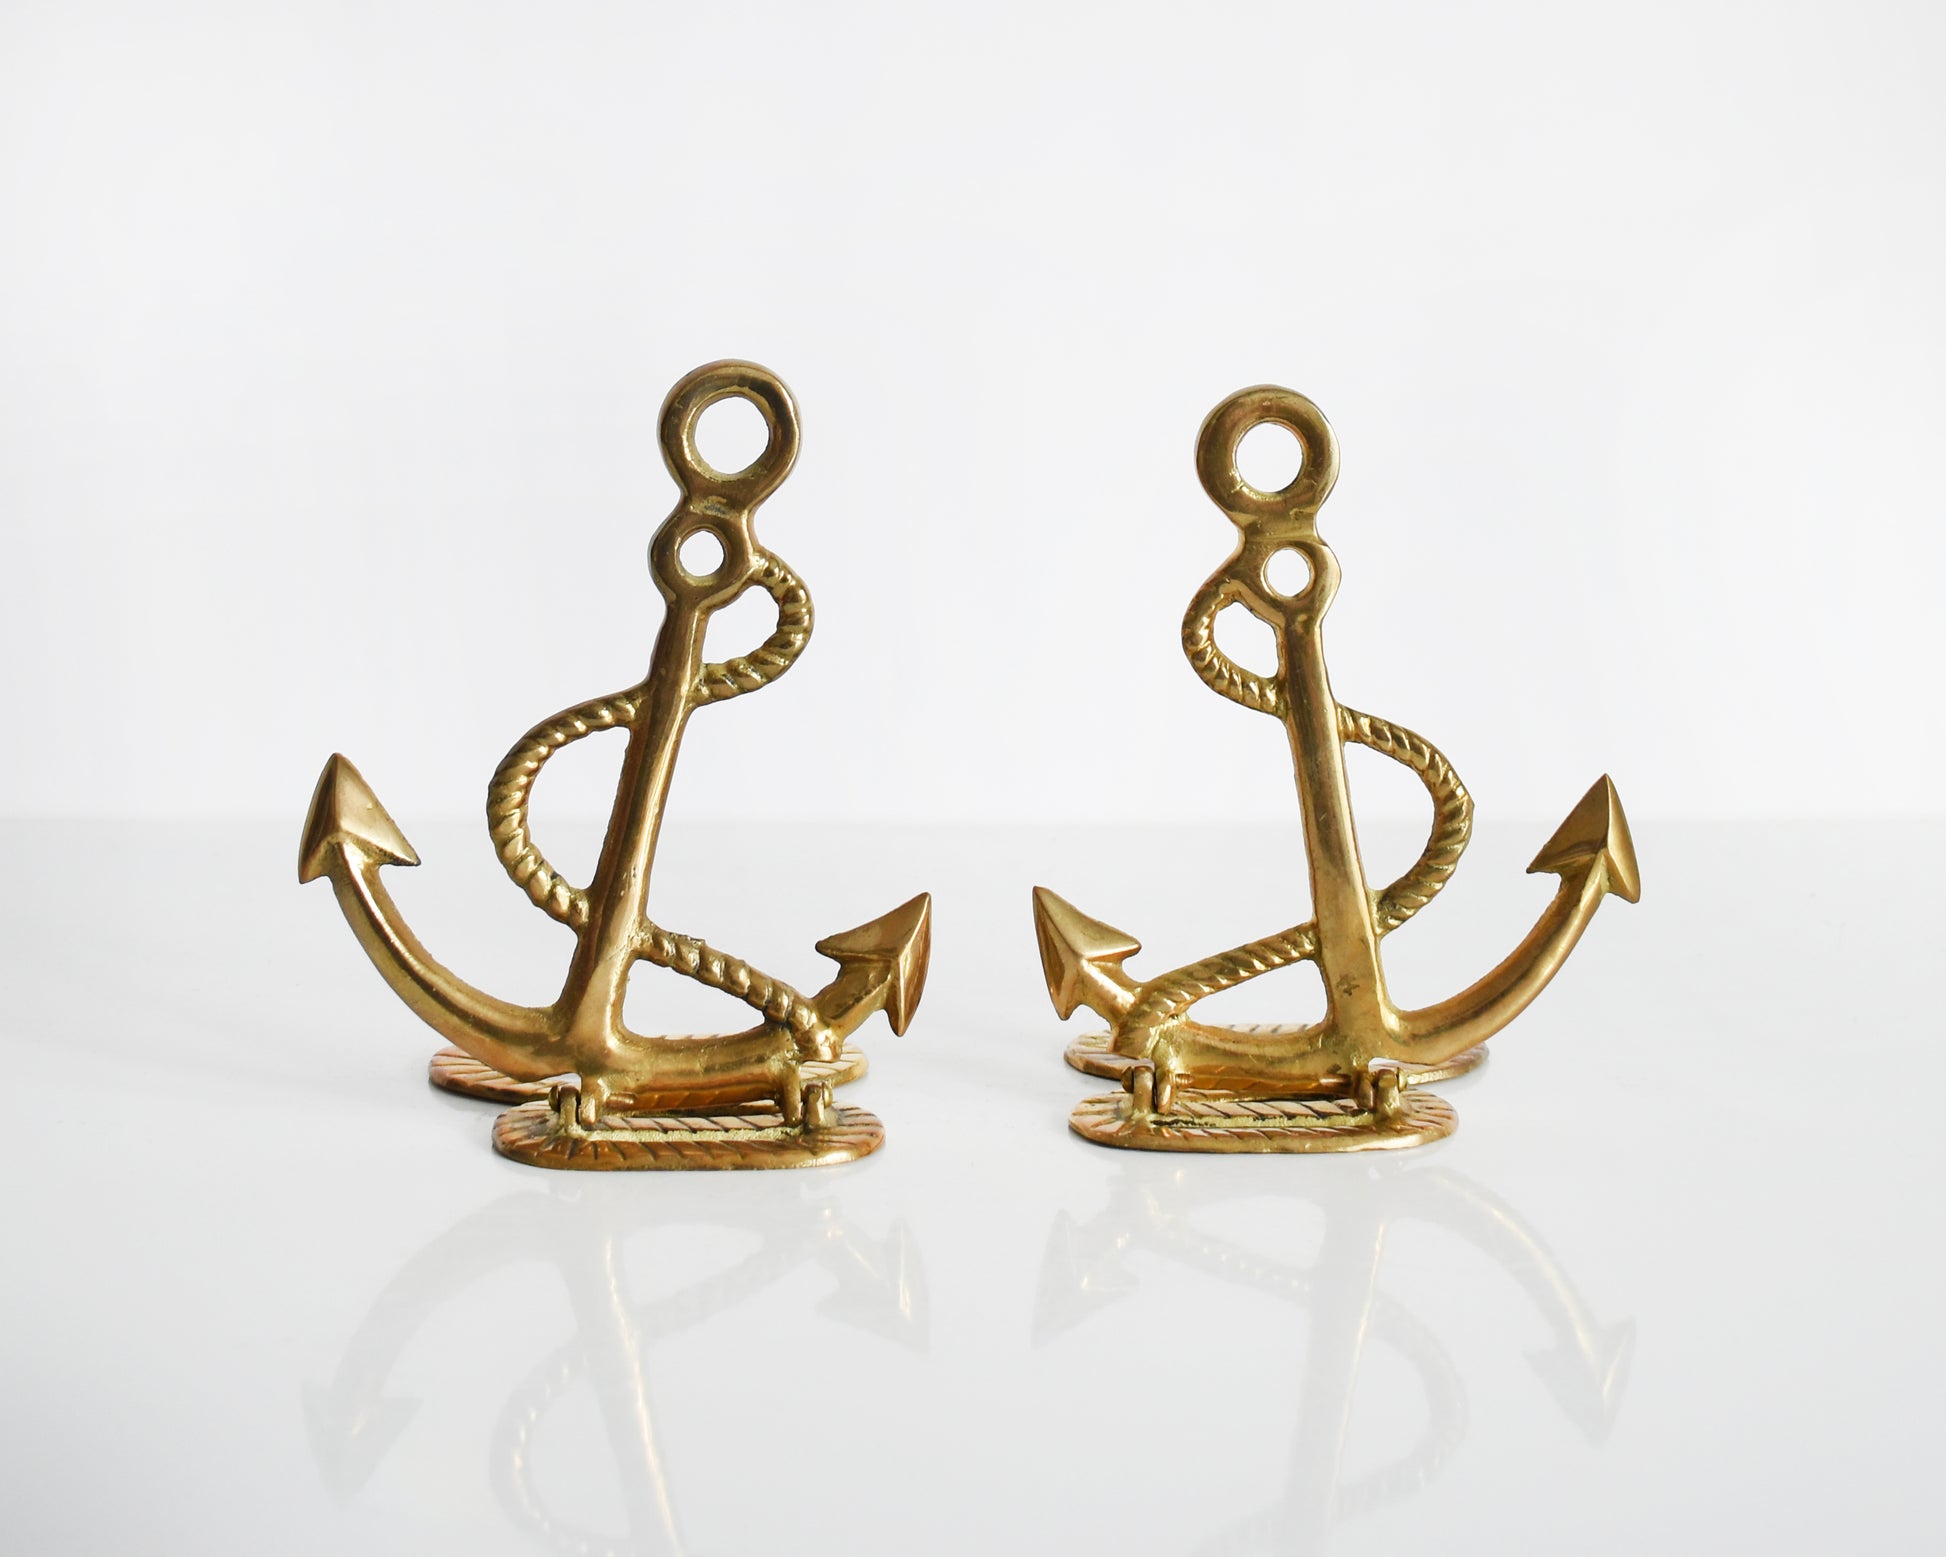 Two vintage brass anchor and rope bookends.